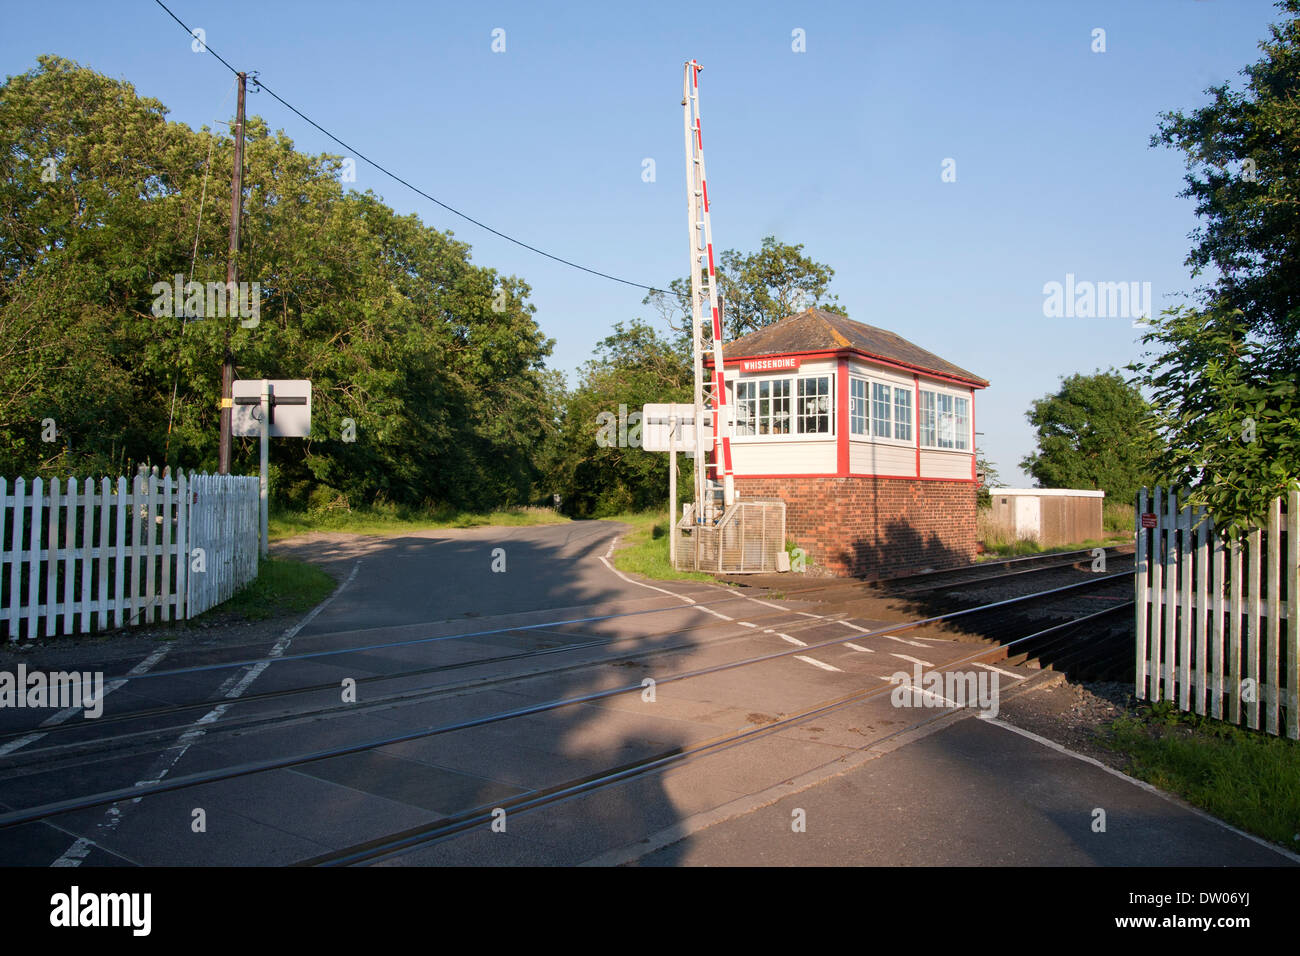 old signal box and railway crossing, Whissendine station, Rutland Stock Photo